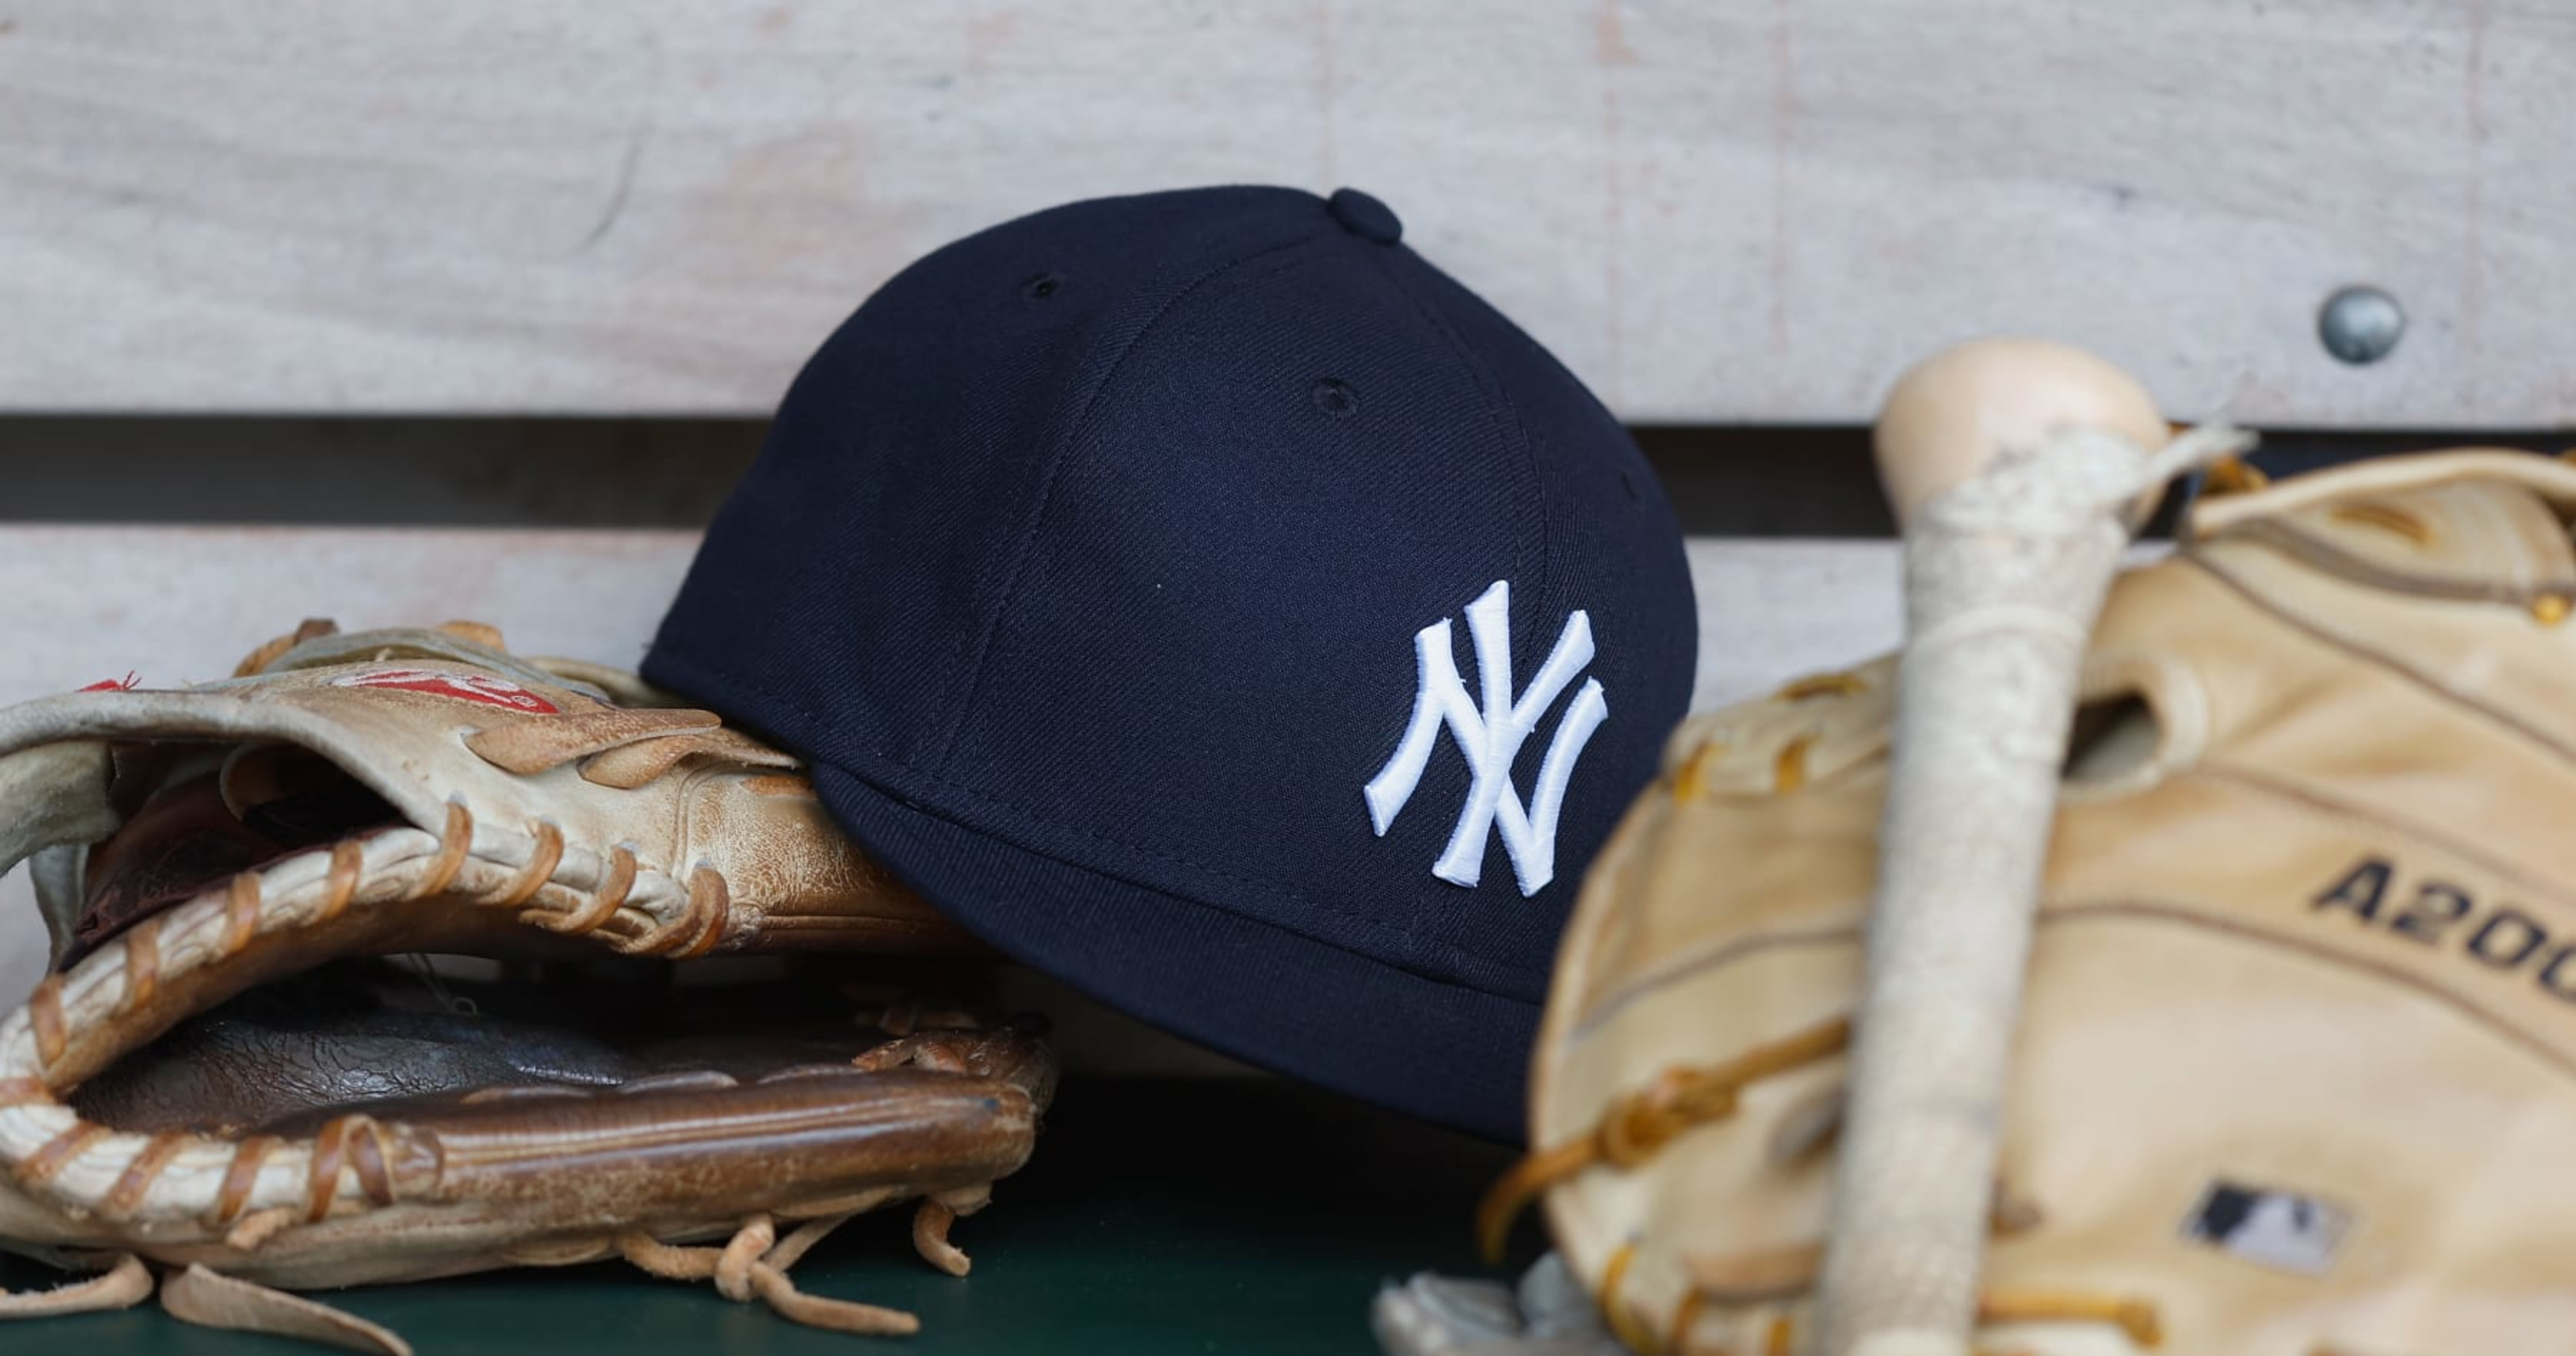 Should the New York Yankees sell at the Trade Deadline? - Sports